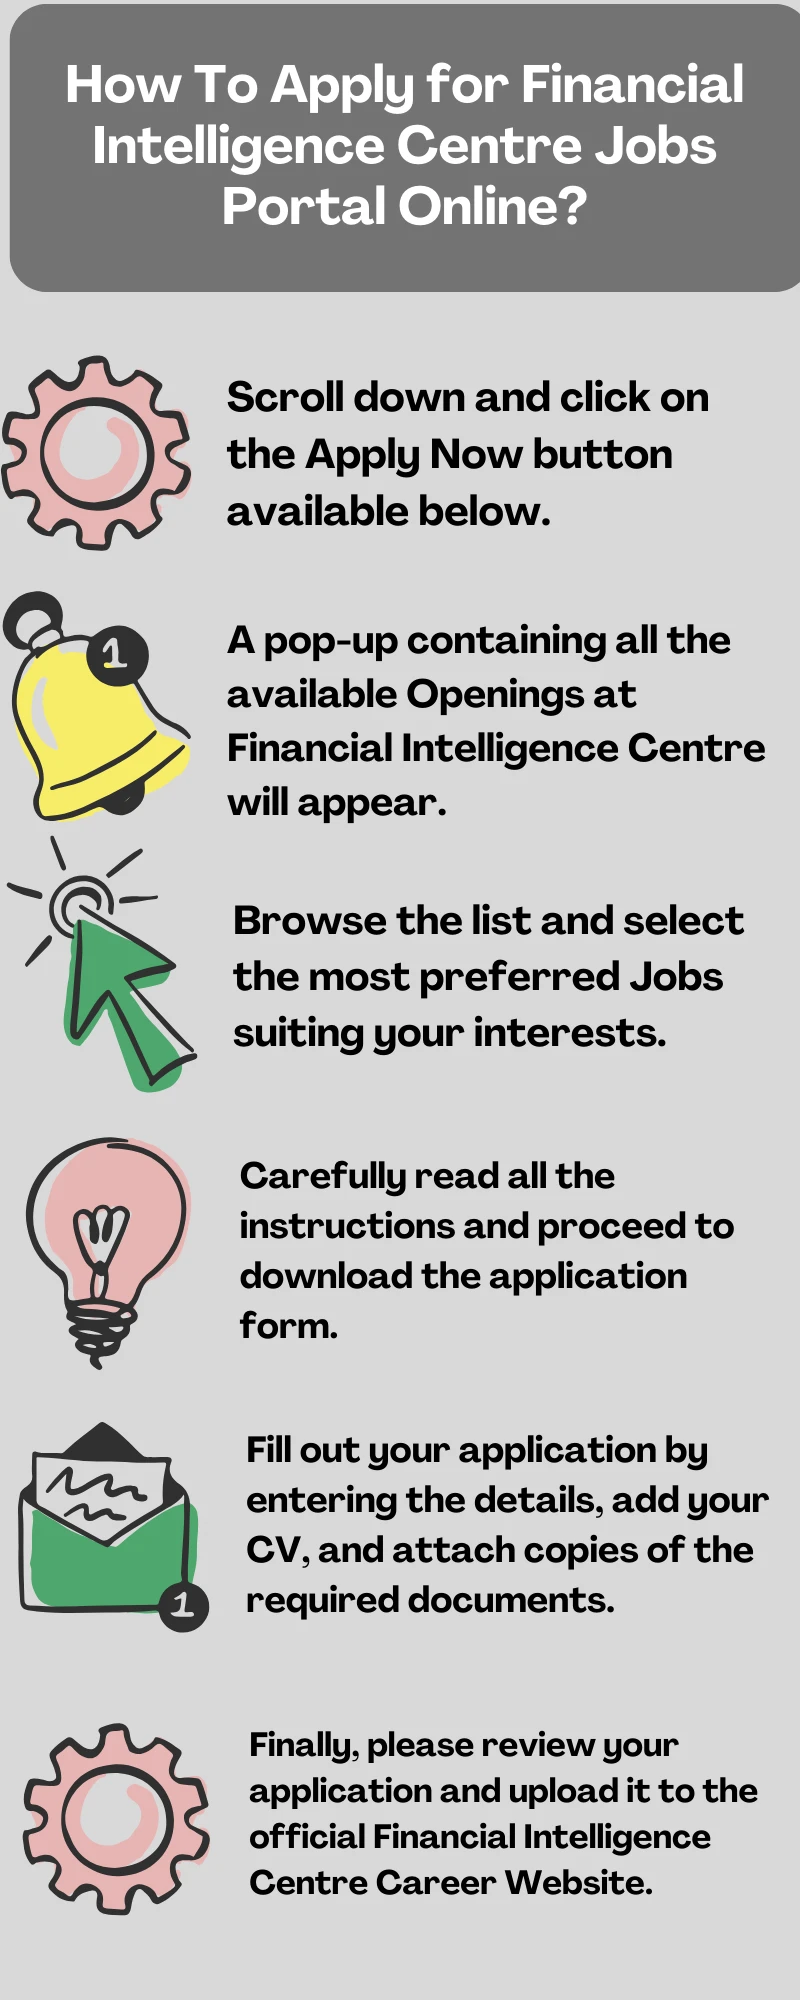 How To Apply for Financial Intelligence Centre Jobs Portal Online?